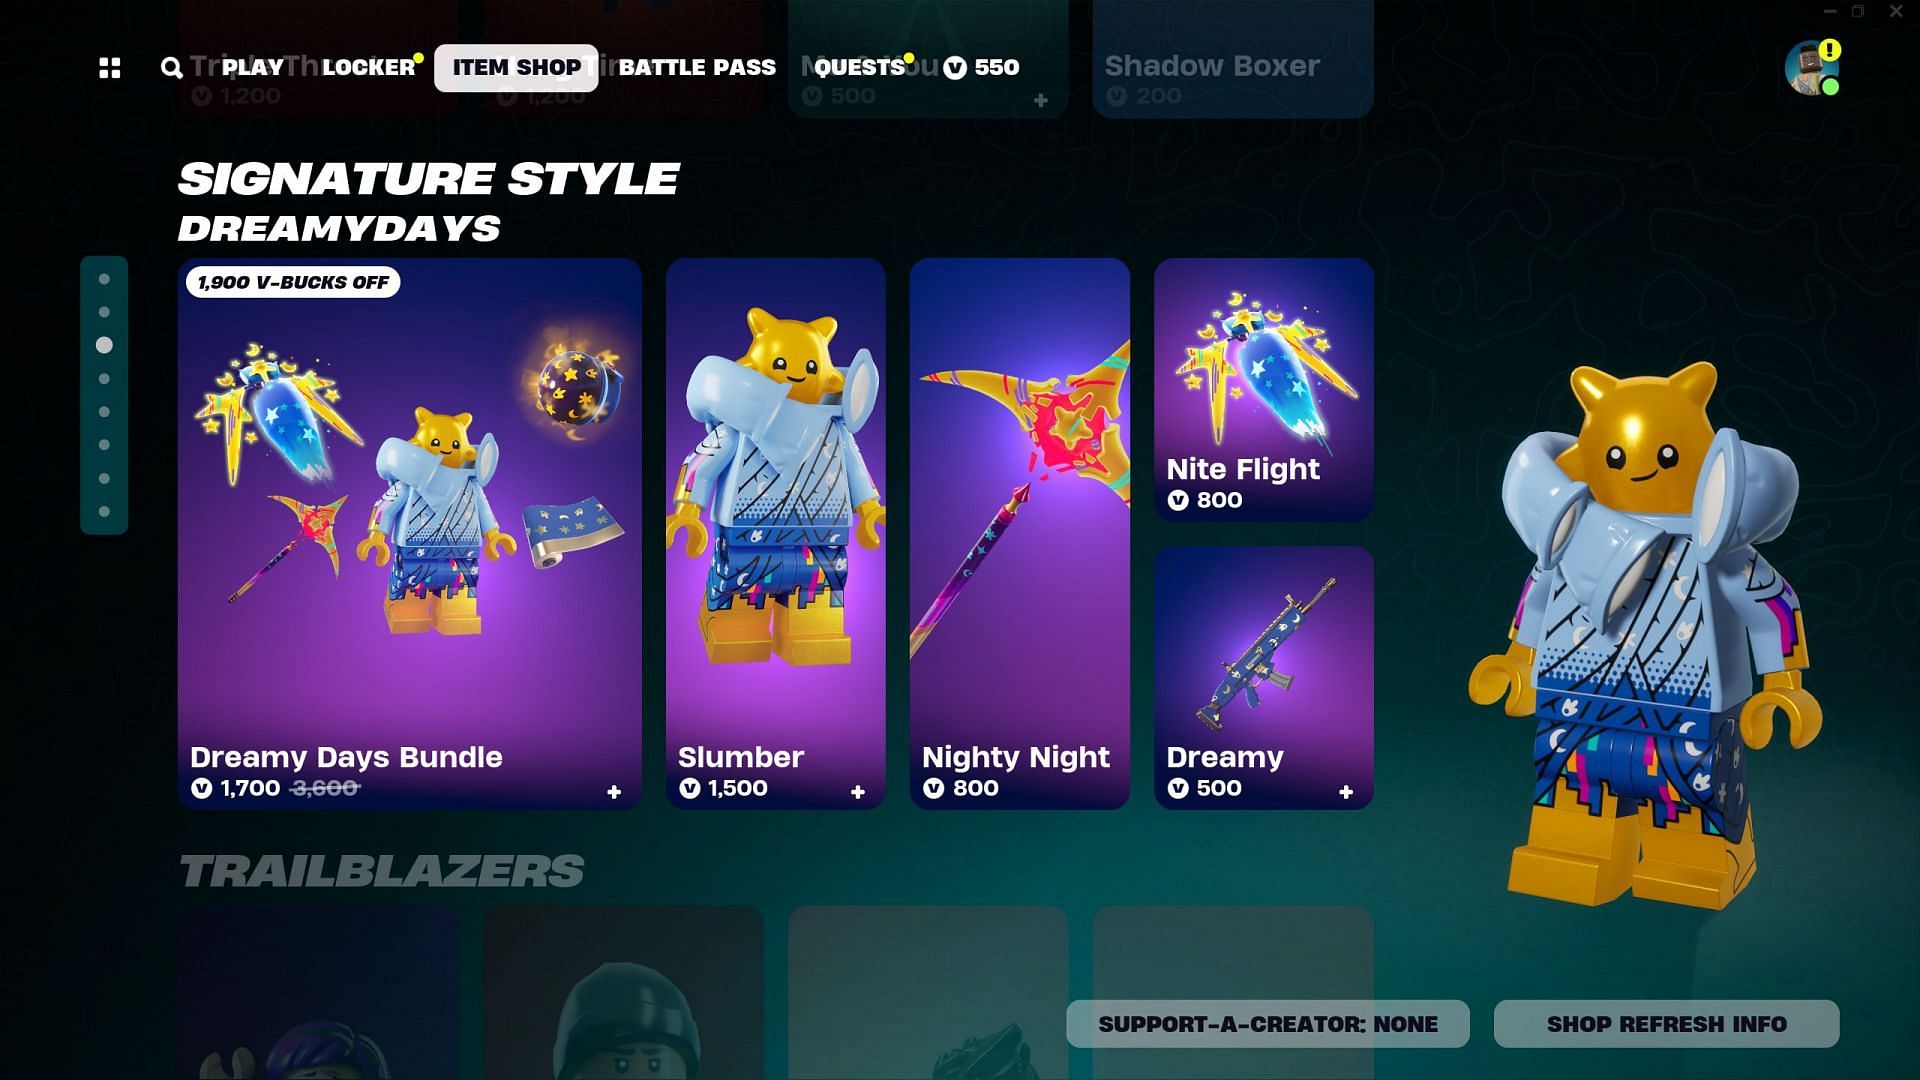 Slumber Skin is currently listed in the Item Shop (Image via Epic Games)